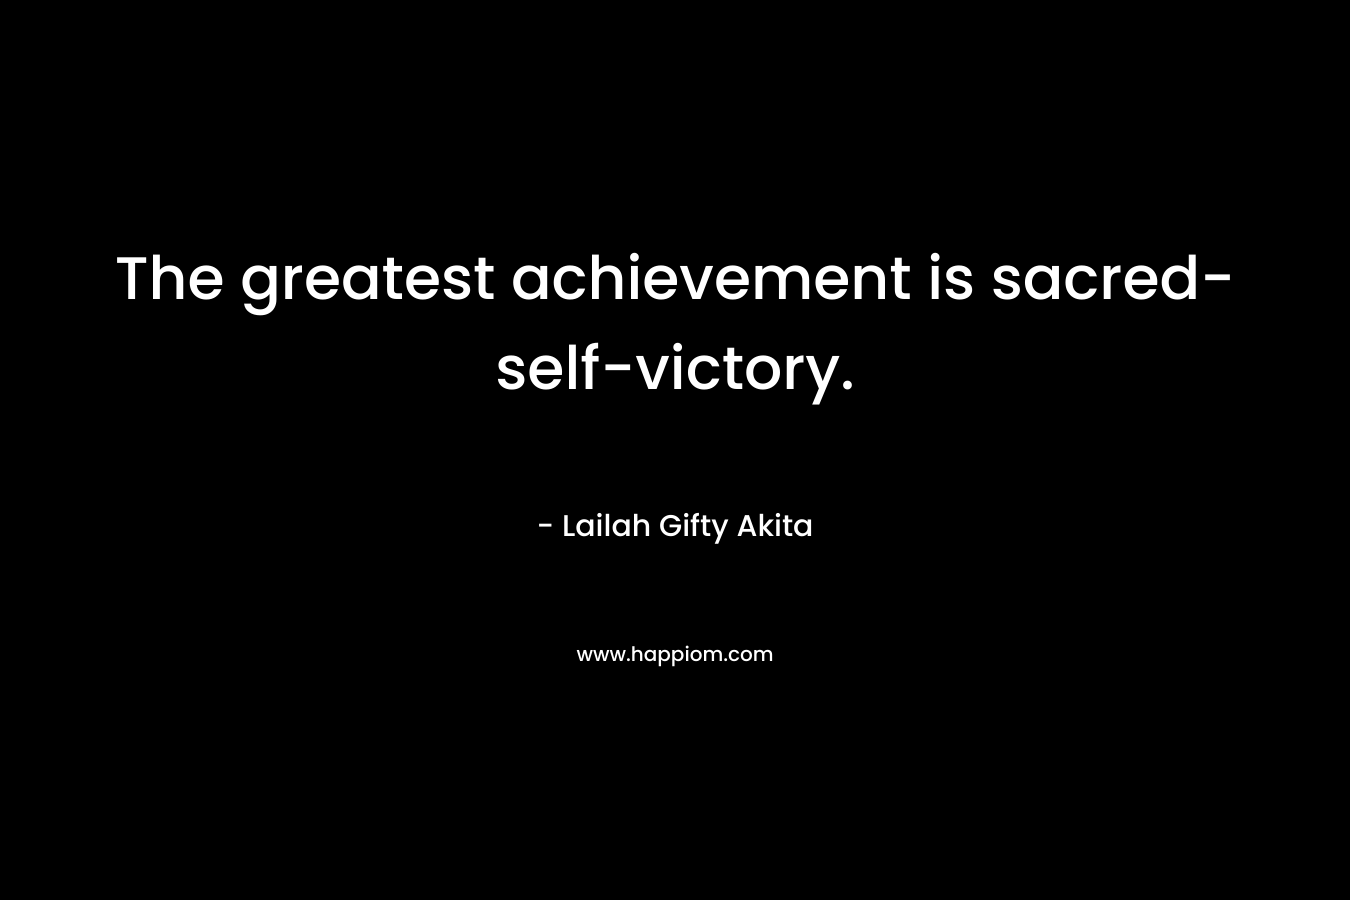 The greatest achievement is sacred-self-victory.